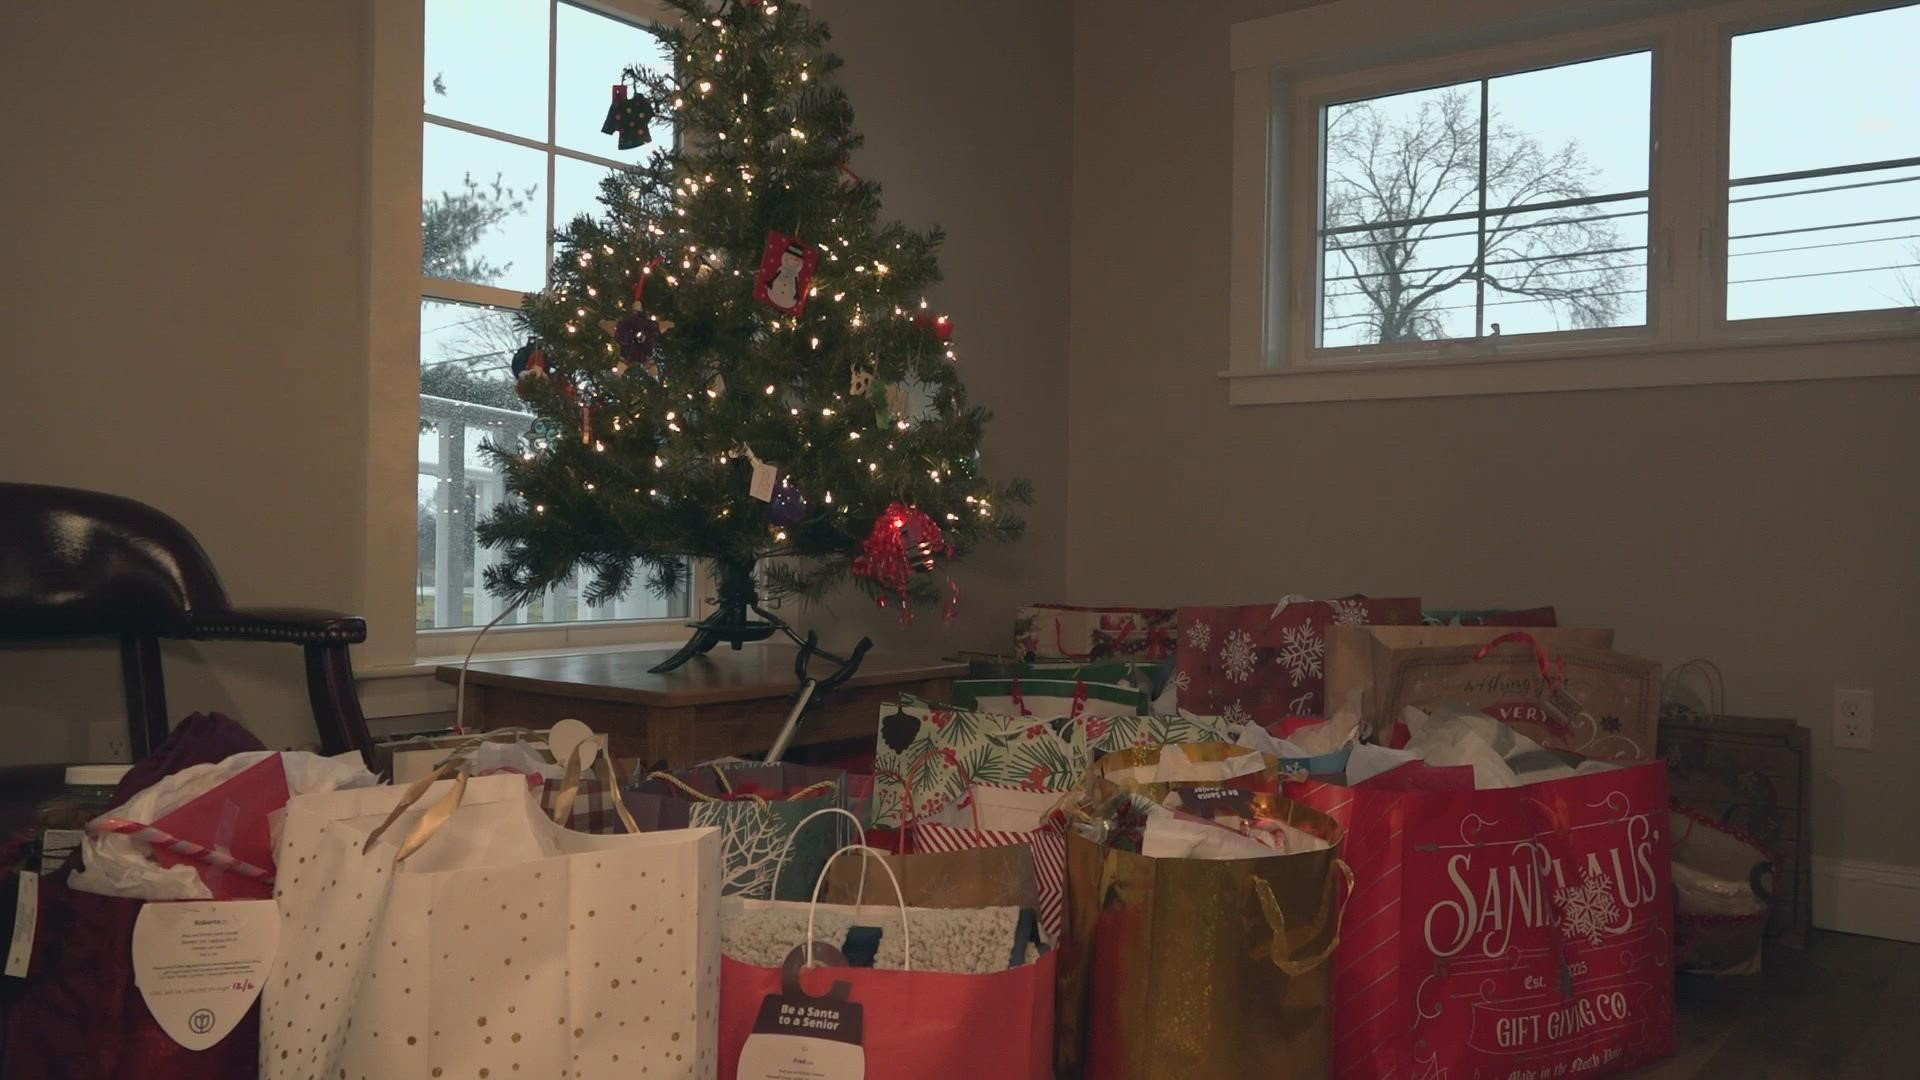 The 'Be a Santa to a Senior' program through Home Instead helps get Cumberland County seniors practical gifts for the holidays, like clothing and toiletries.